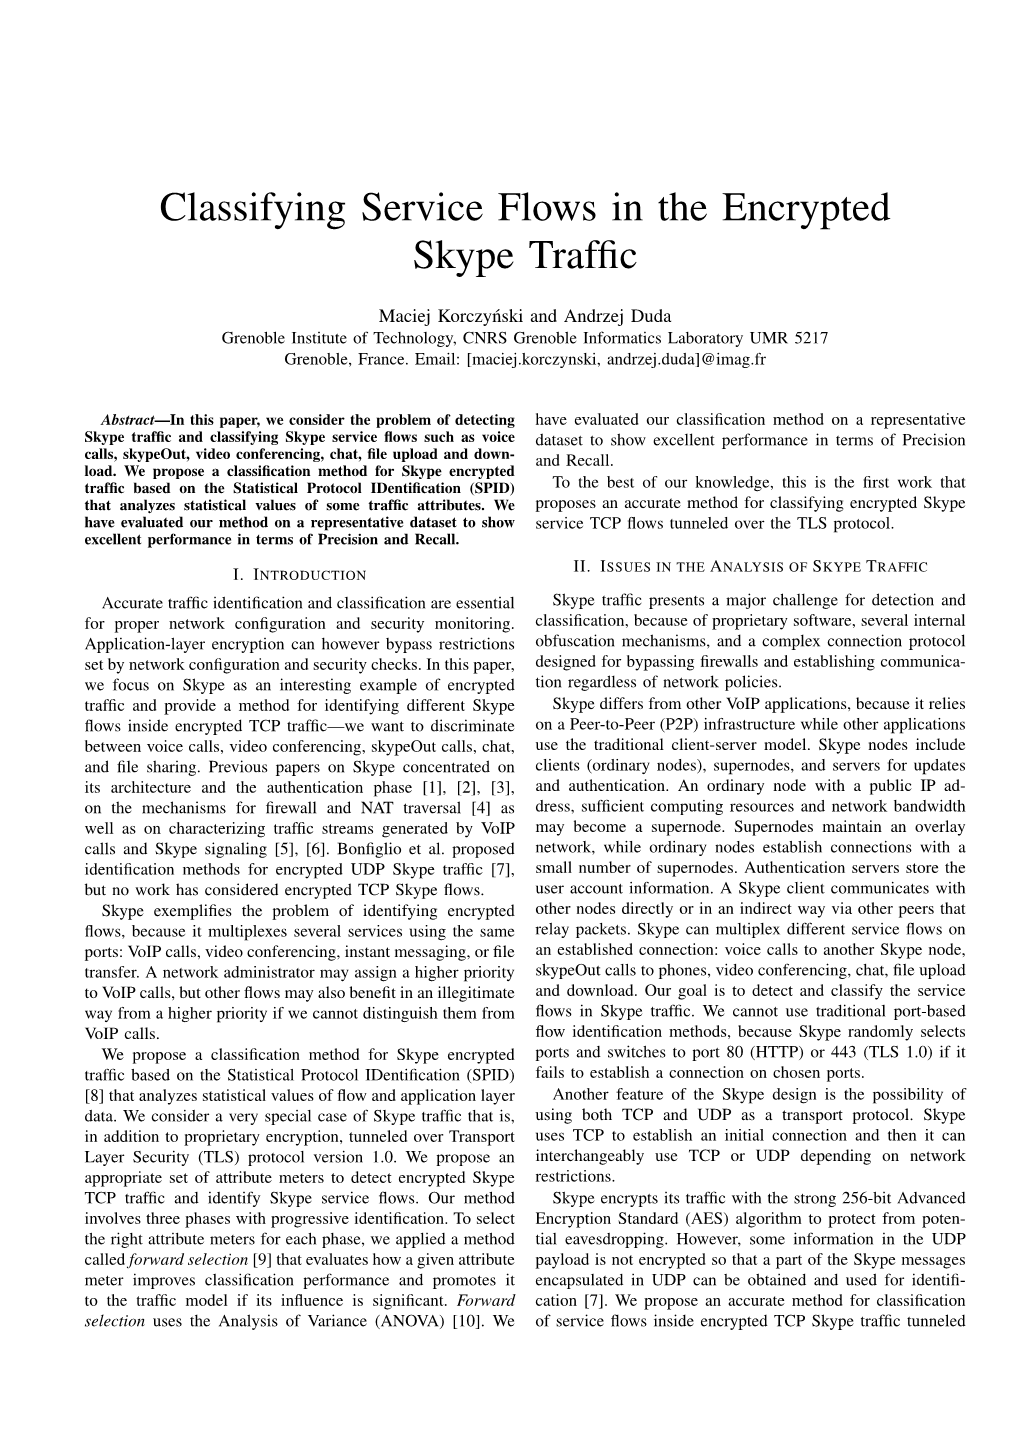 Classifying Service Flows in the Encrypted Skype Traffic